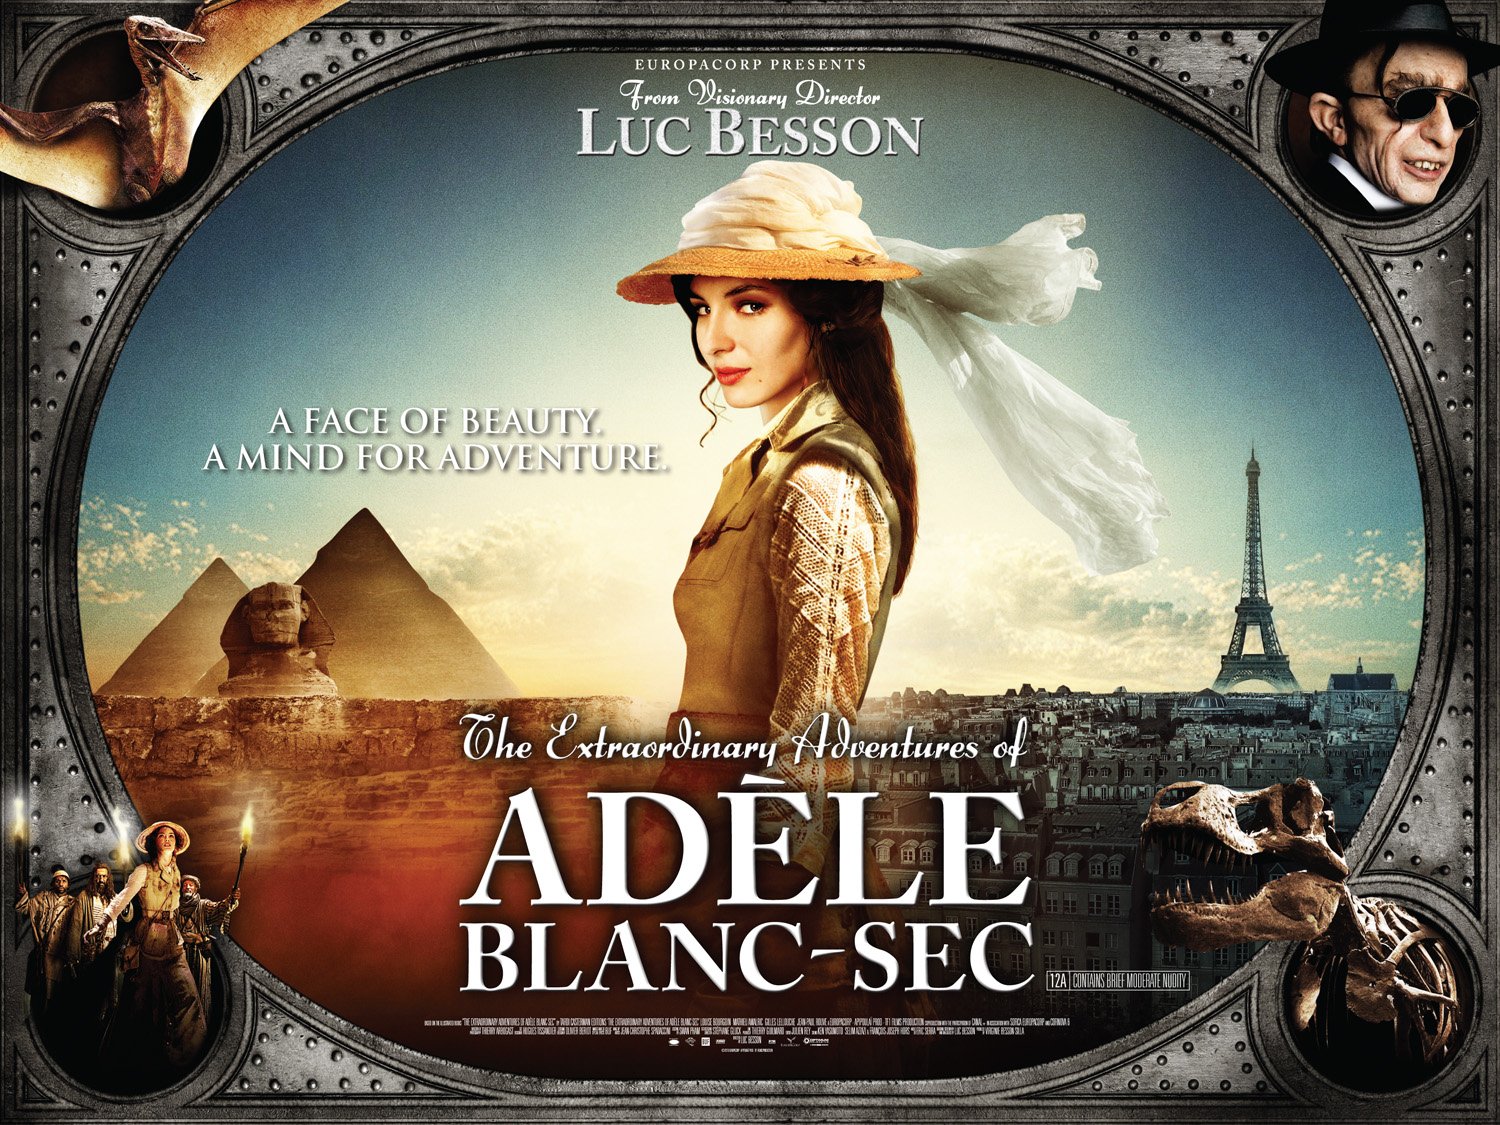 Extra Large Movie Poster Image for Les aventures extraordinaires d'Adèle Blanc-Sec (#19 of 19)